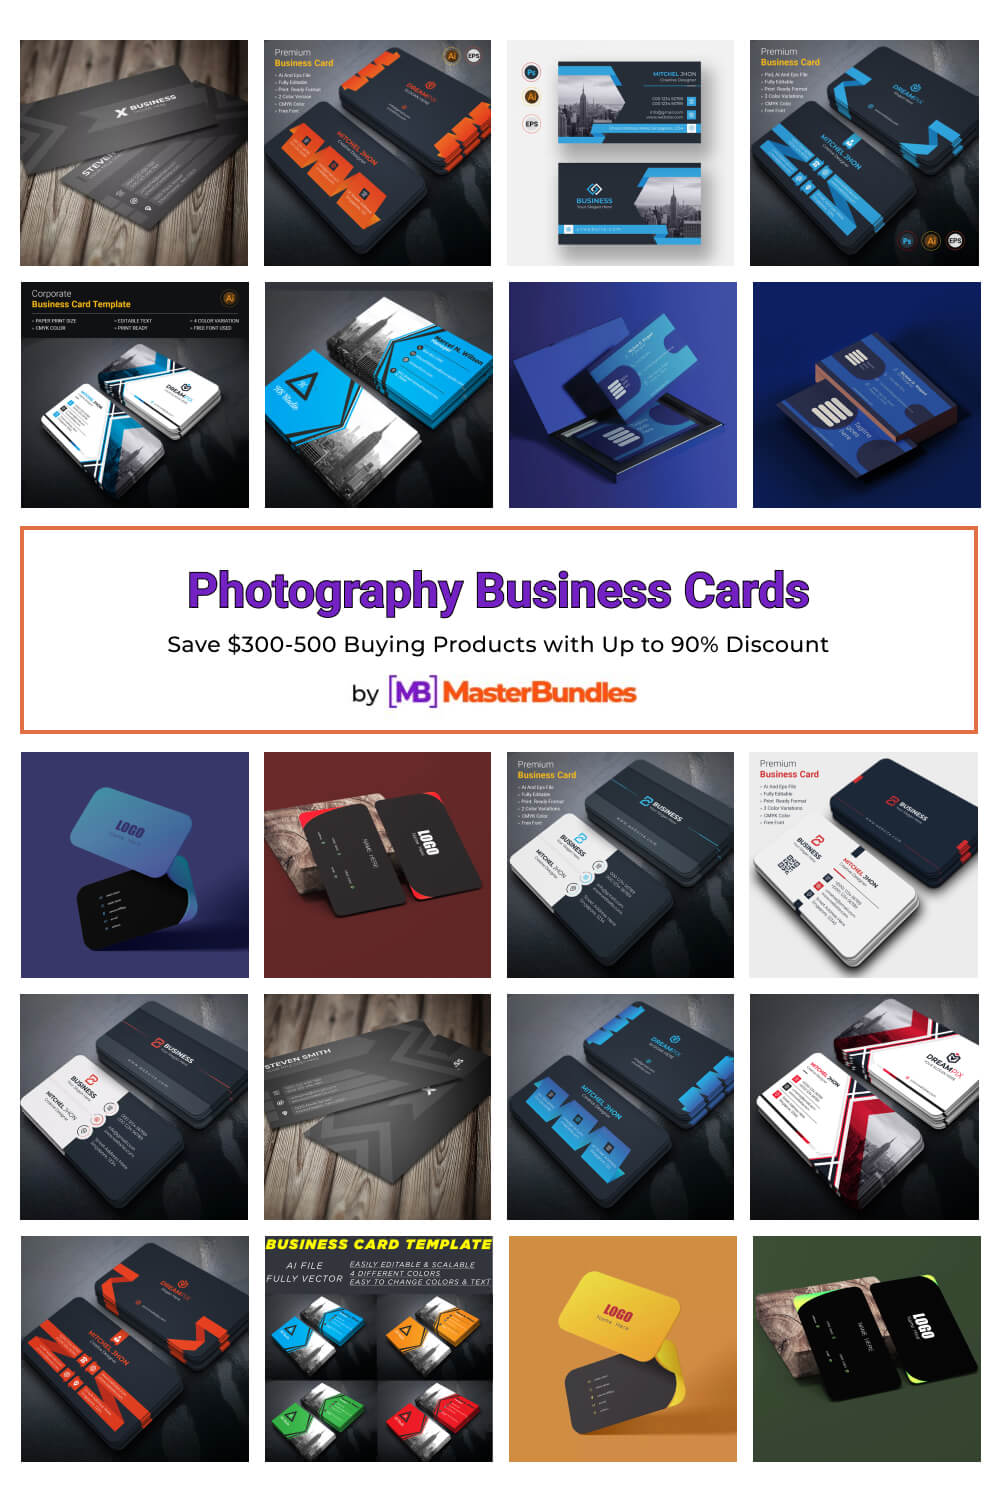 photography business cards pinterest image.